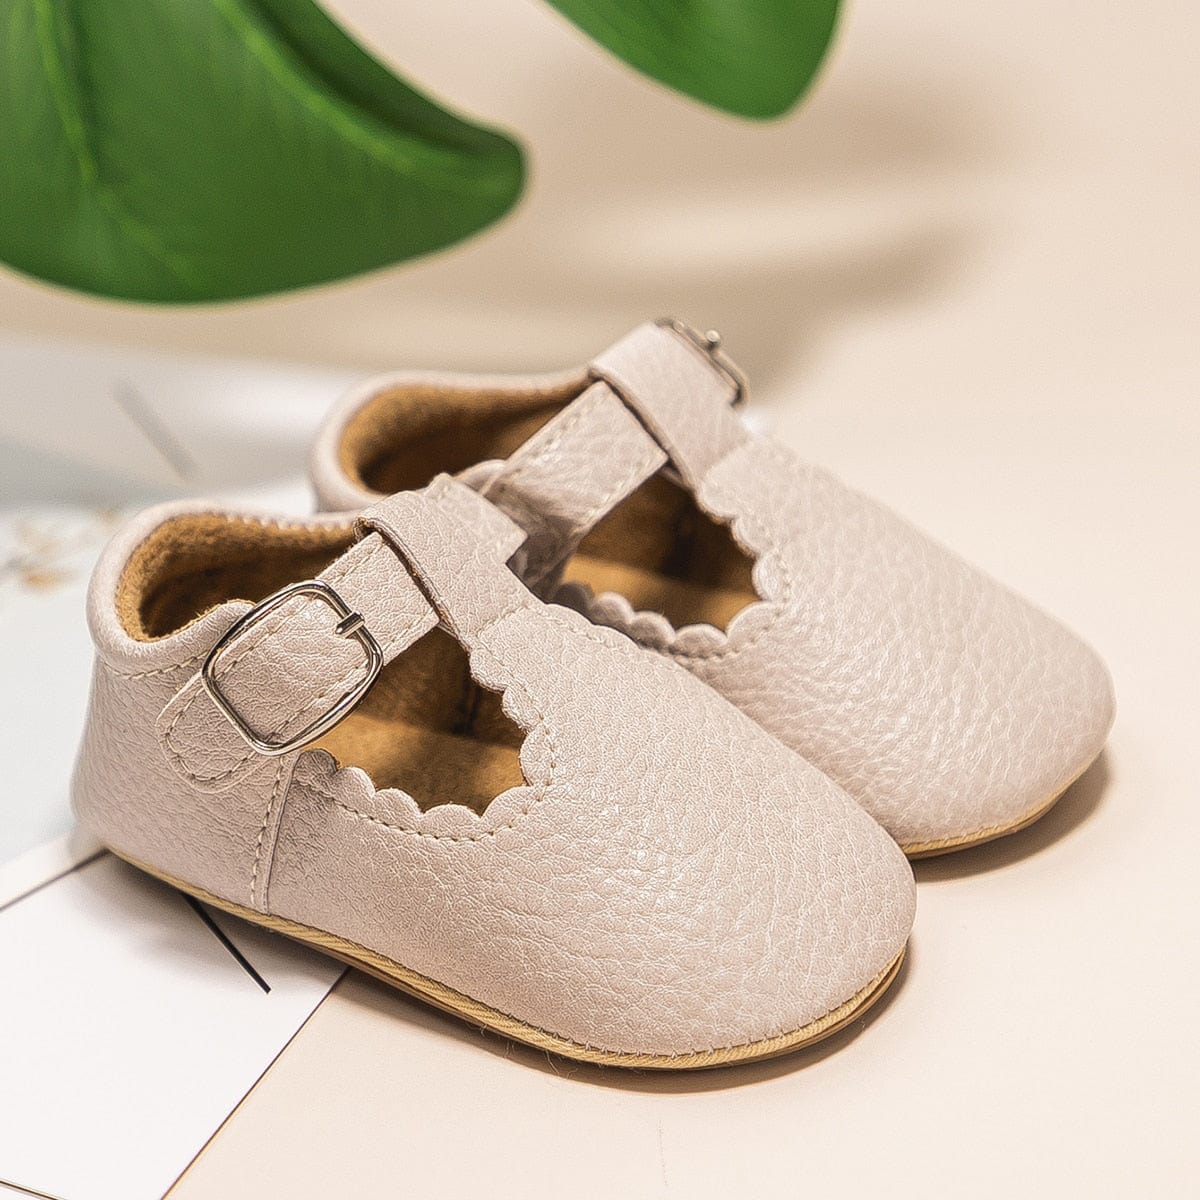 Proactive Baby Beige / 0-6 Months KIDSUN Newborn Baby Shoes With PU Leather Boy Girl Shoes - Toddler Rubber Sole Anti-slip First Walkers Infant